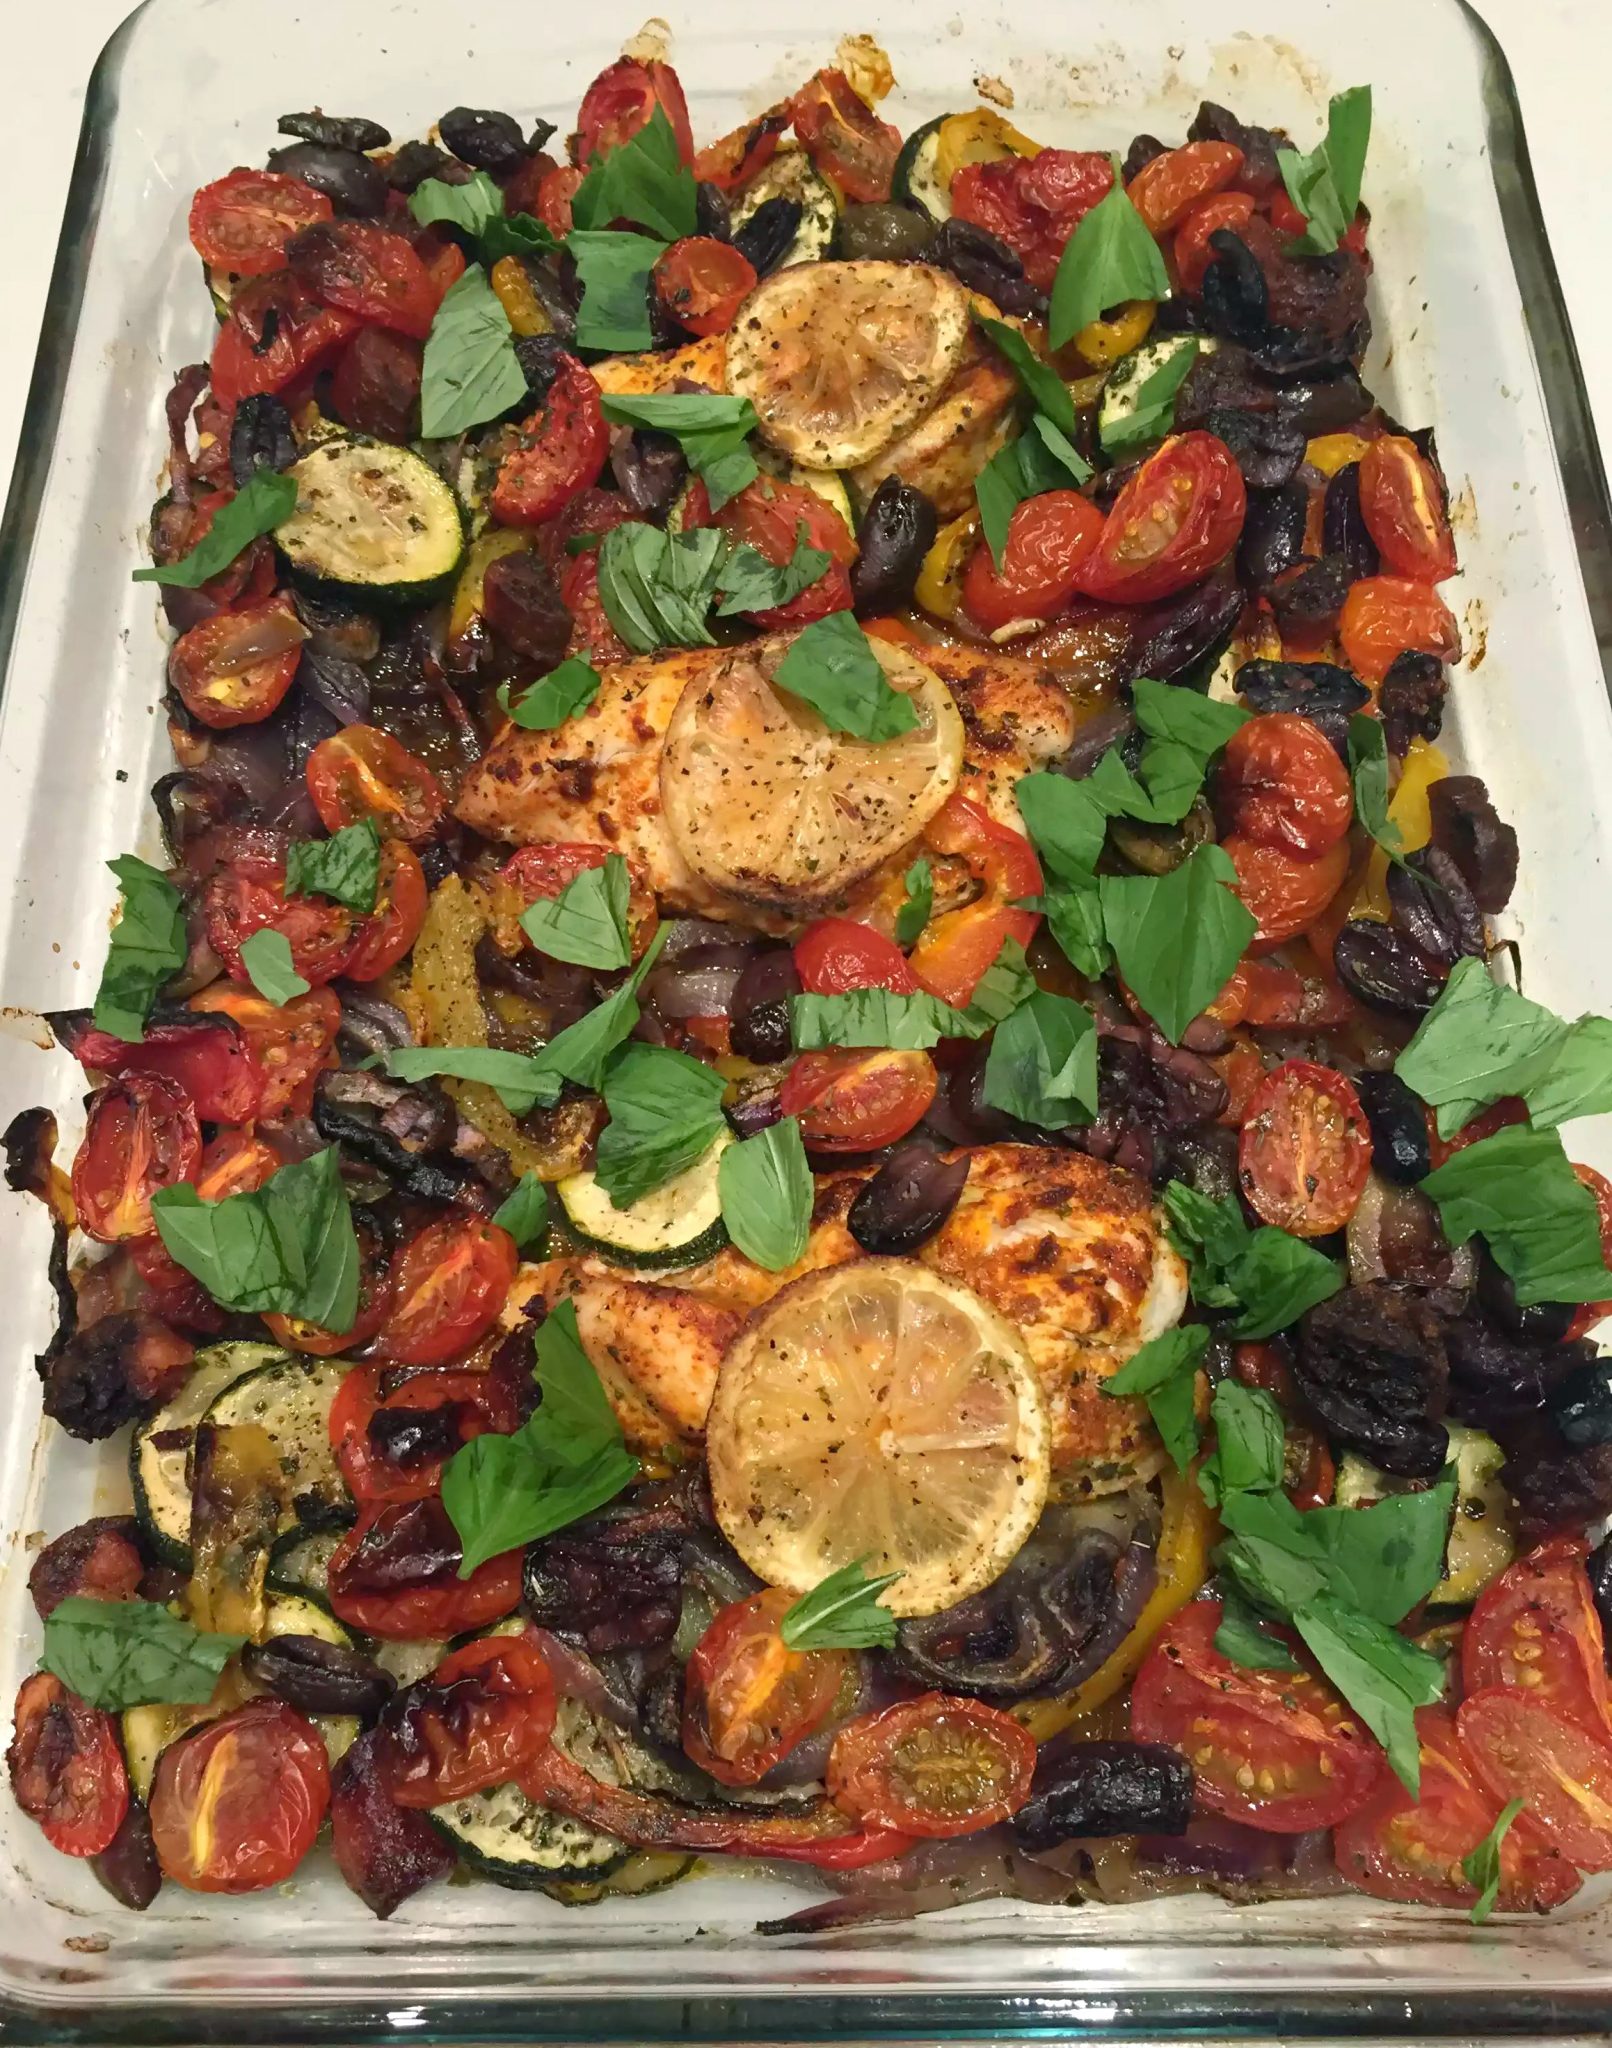 Mediterranean Chicken & Chorizo Traybake with Roasted Vegetables Paprika and Olives - SCD, Paleo, Grain-Free, Gluten-Free, Dairy-Free, Refined Sugar-Free, Clean-Eating